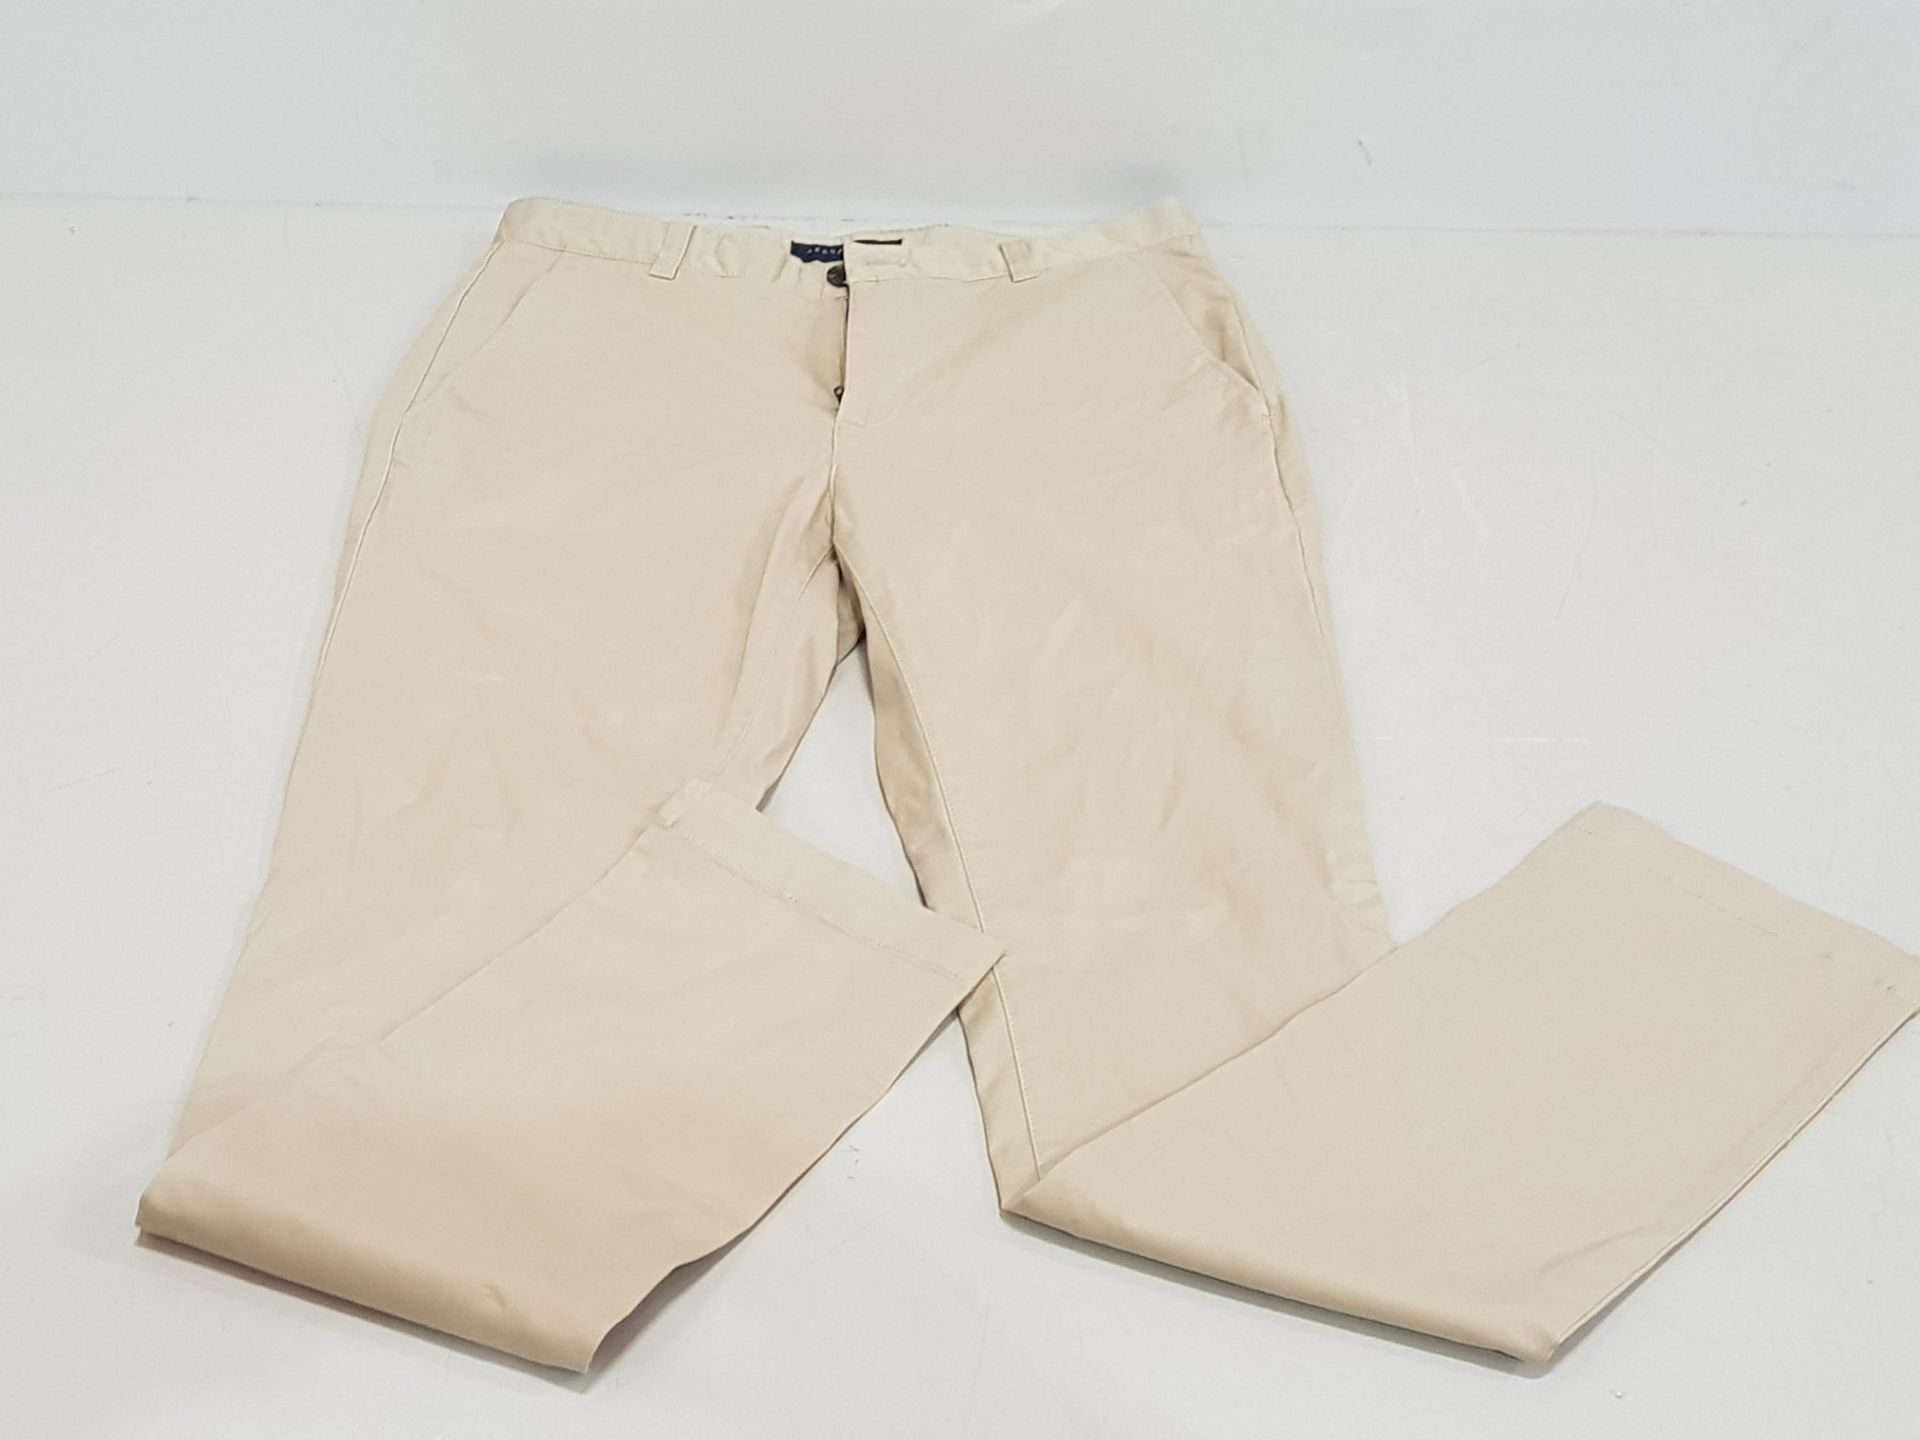 34 X BRAND NEW AEROPOSTALE MENS TAN CORE CHINO PANTS IN MIXED SIZES FROM 28R TO 36R IN 3 BOXES